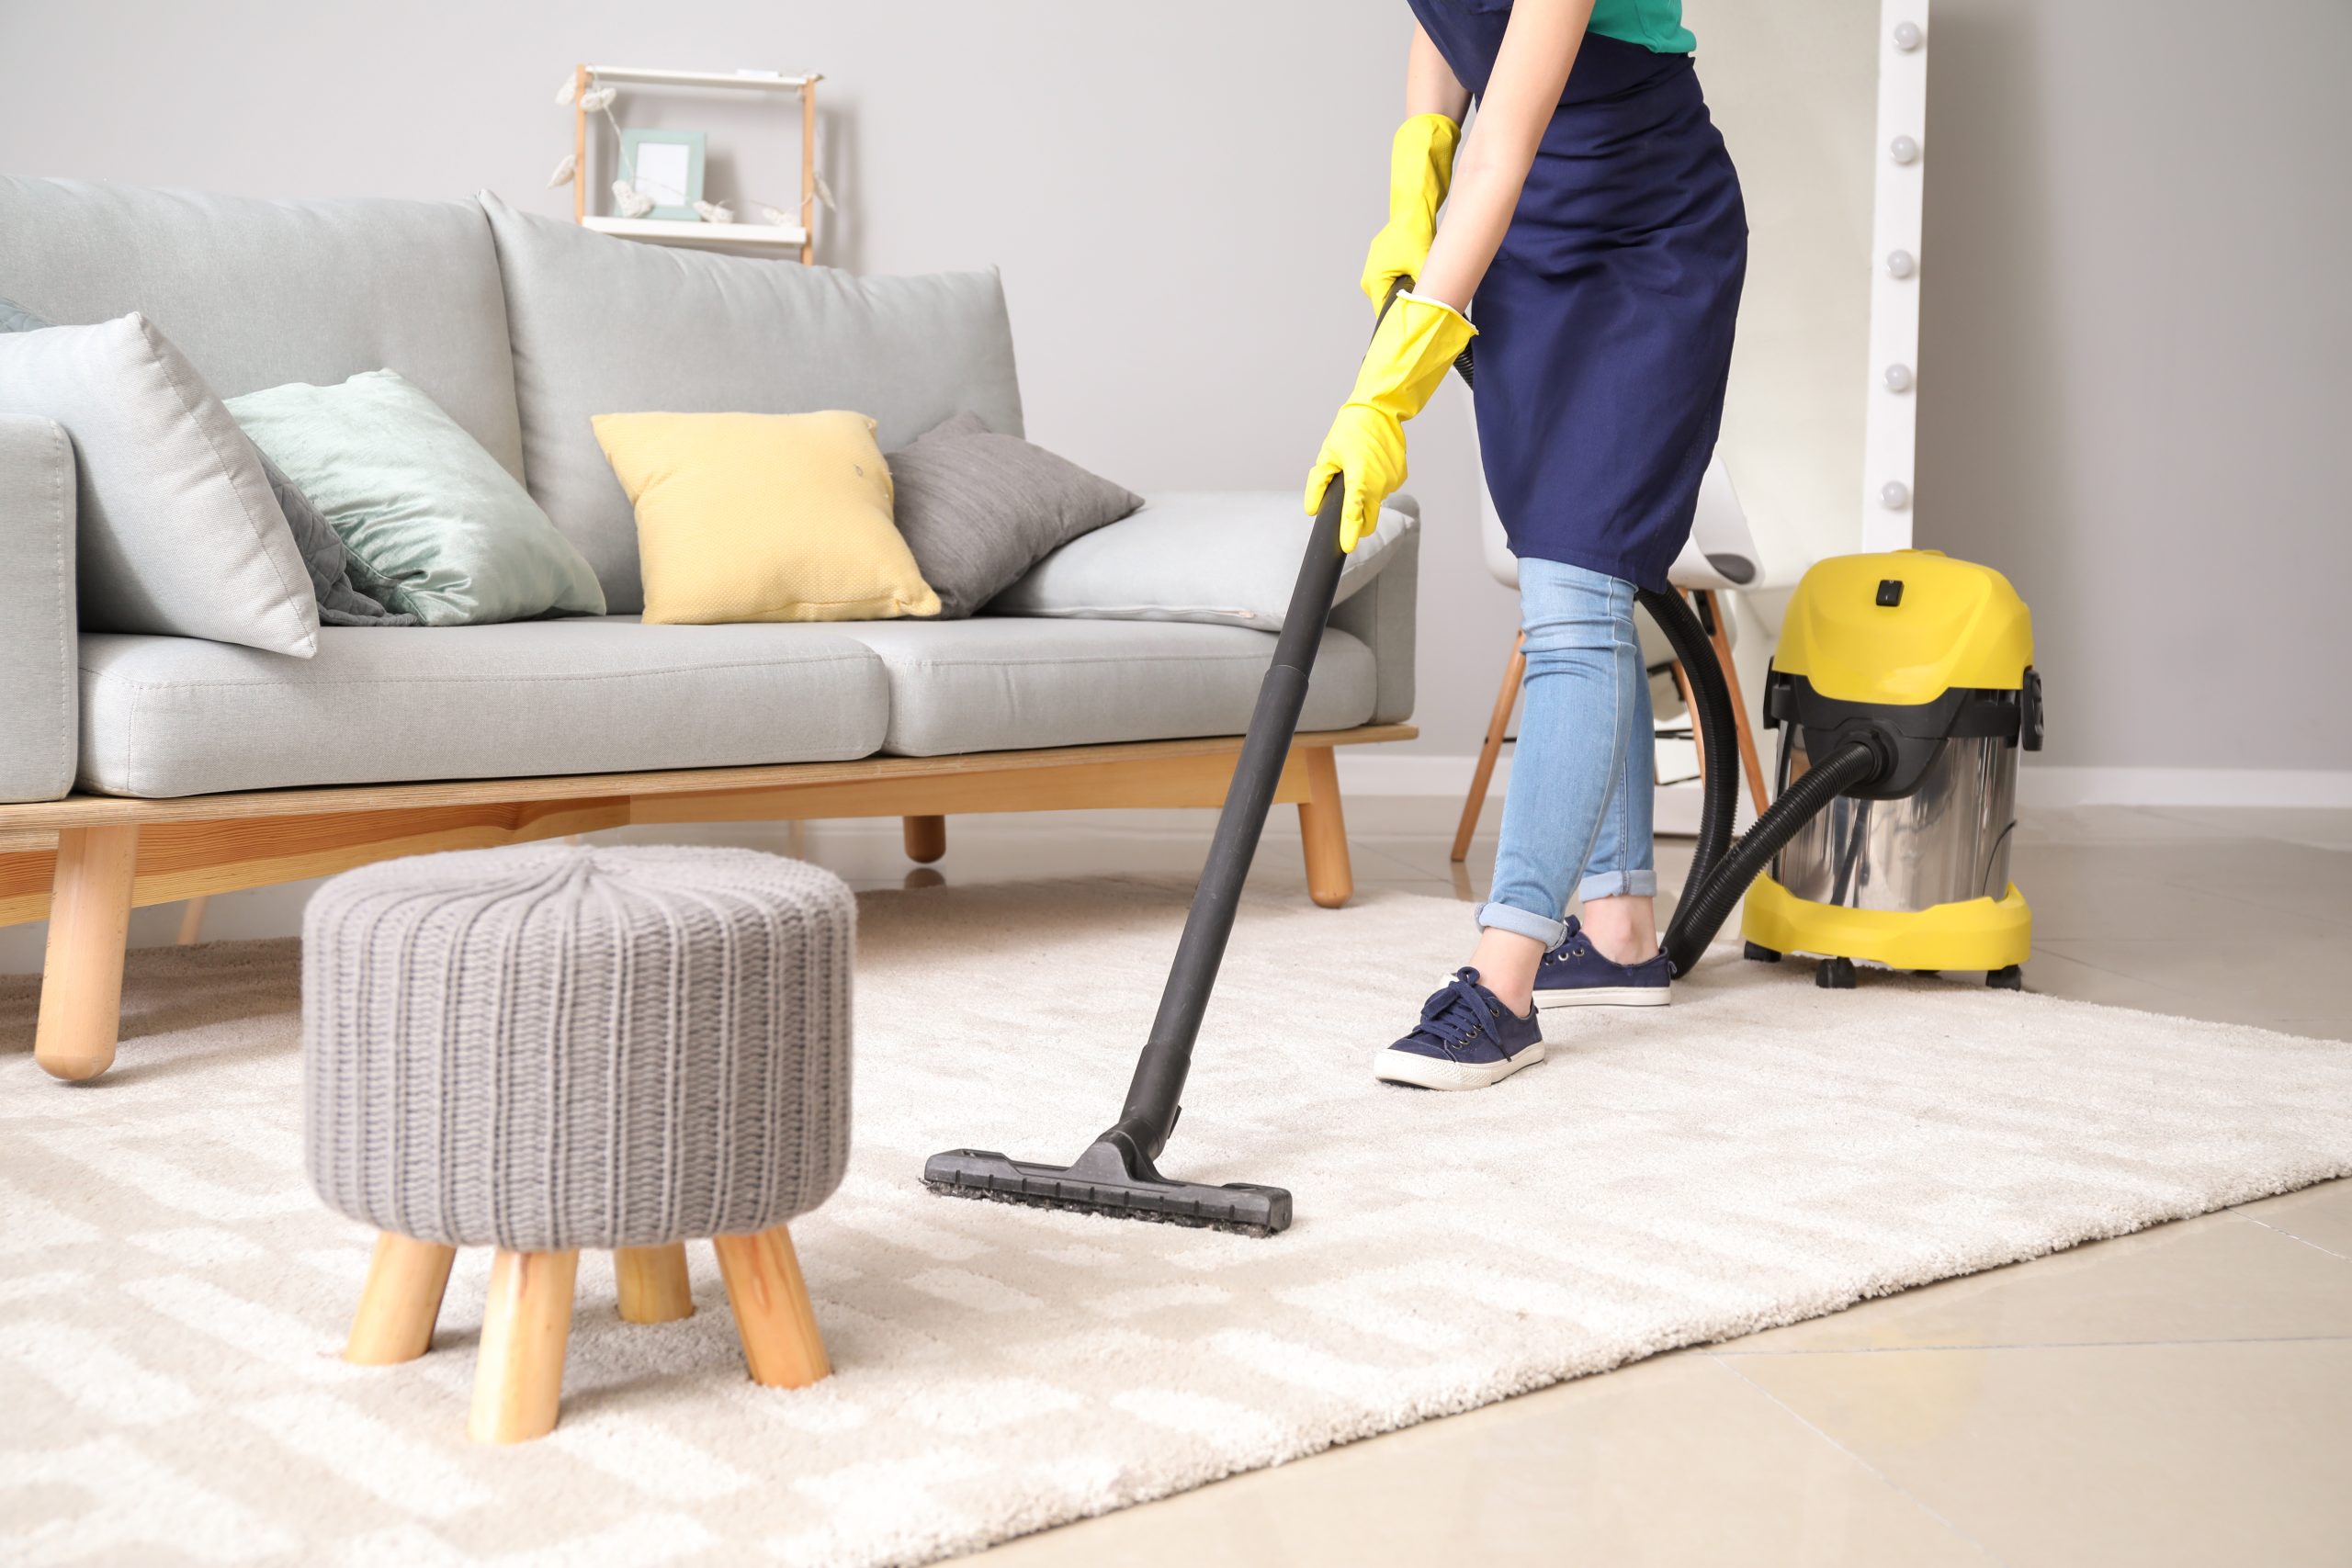 Are there any restrictions on the size or type of property you clean?